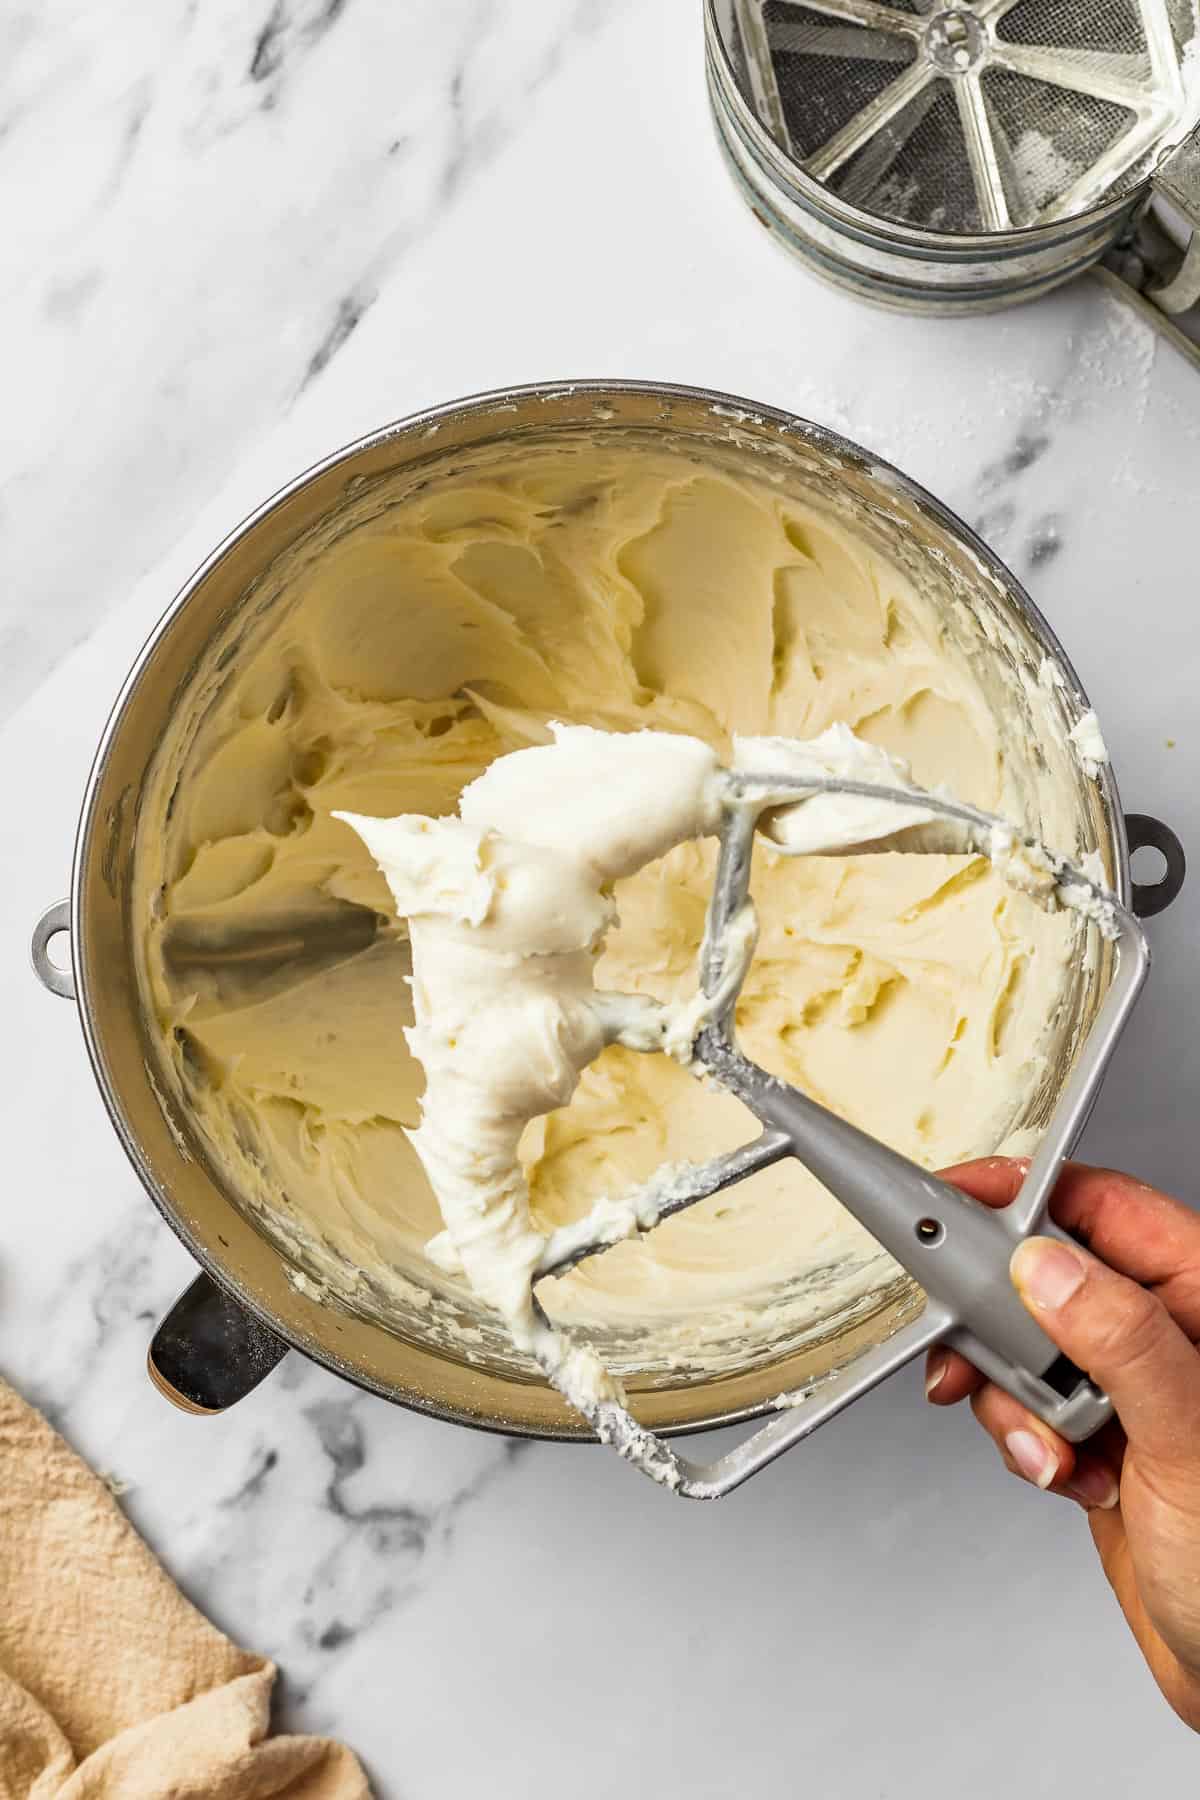 A metal mixing bowl with whipped frosting inside. A woman's hand is lifting a beater attachment out of the frosting.